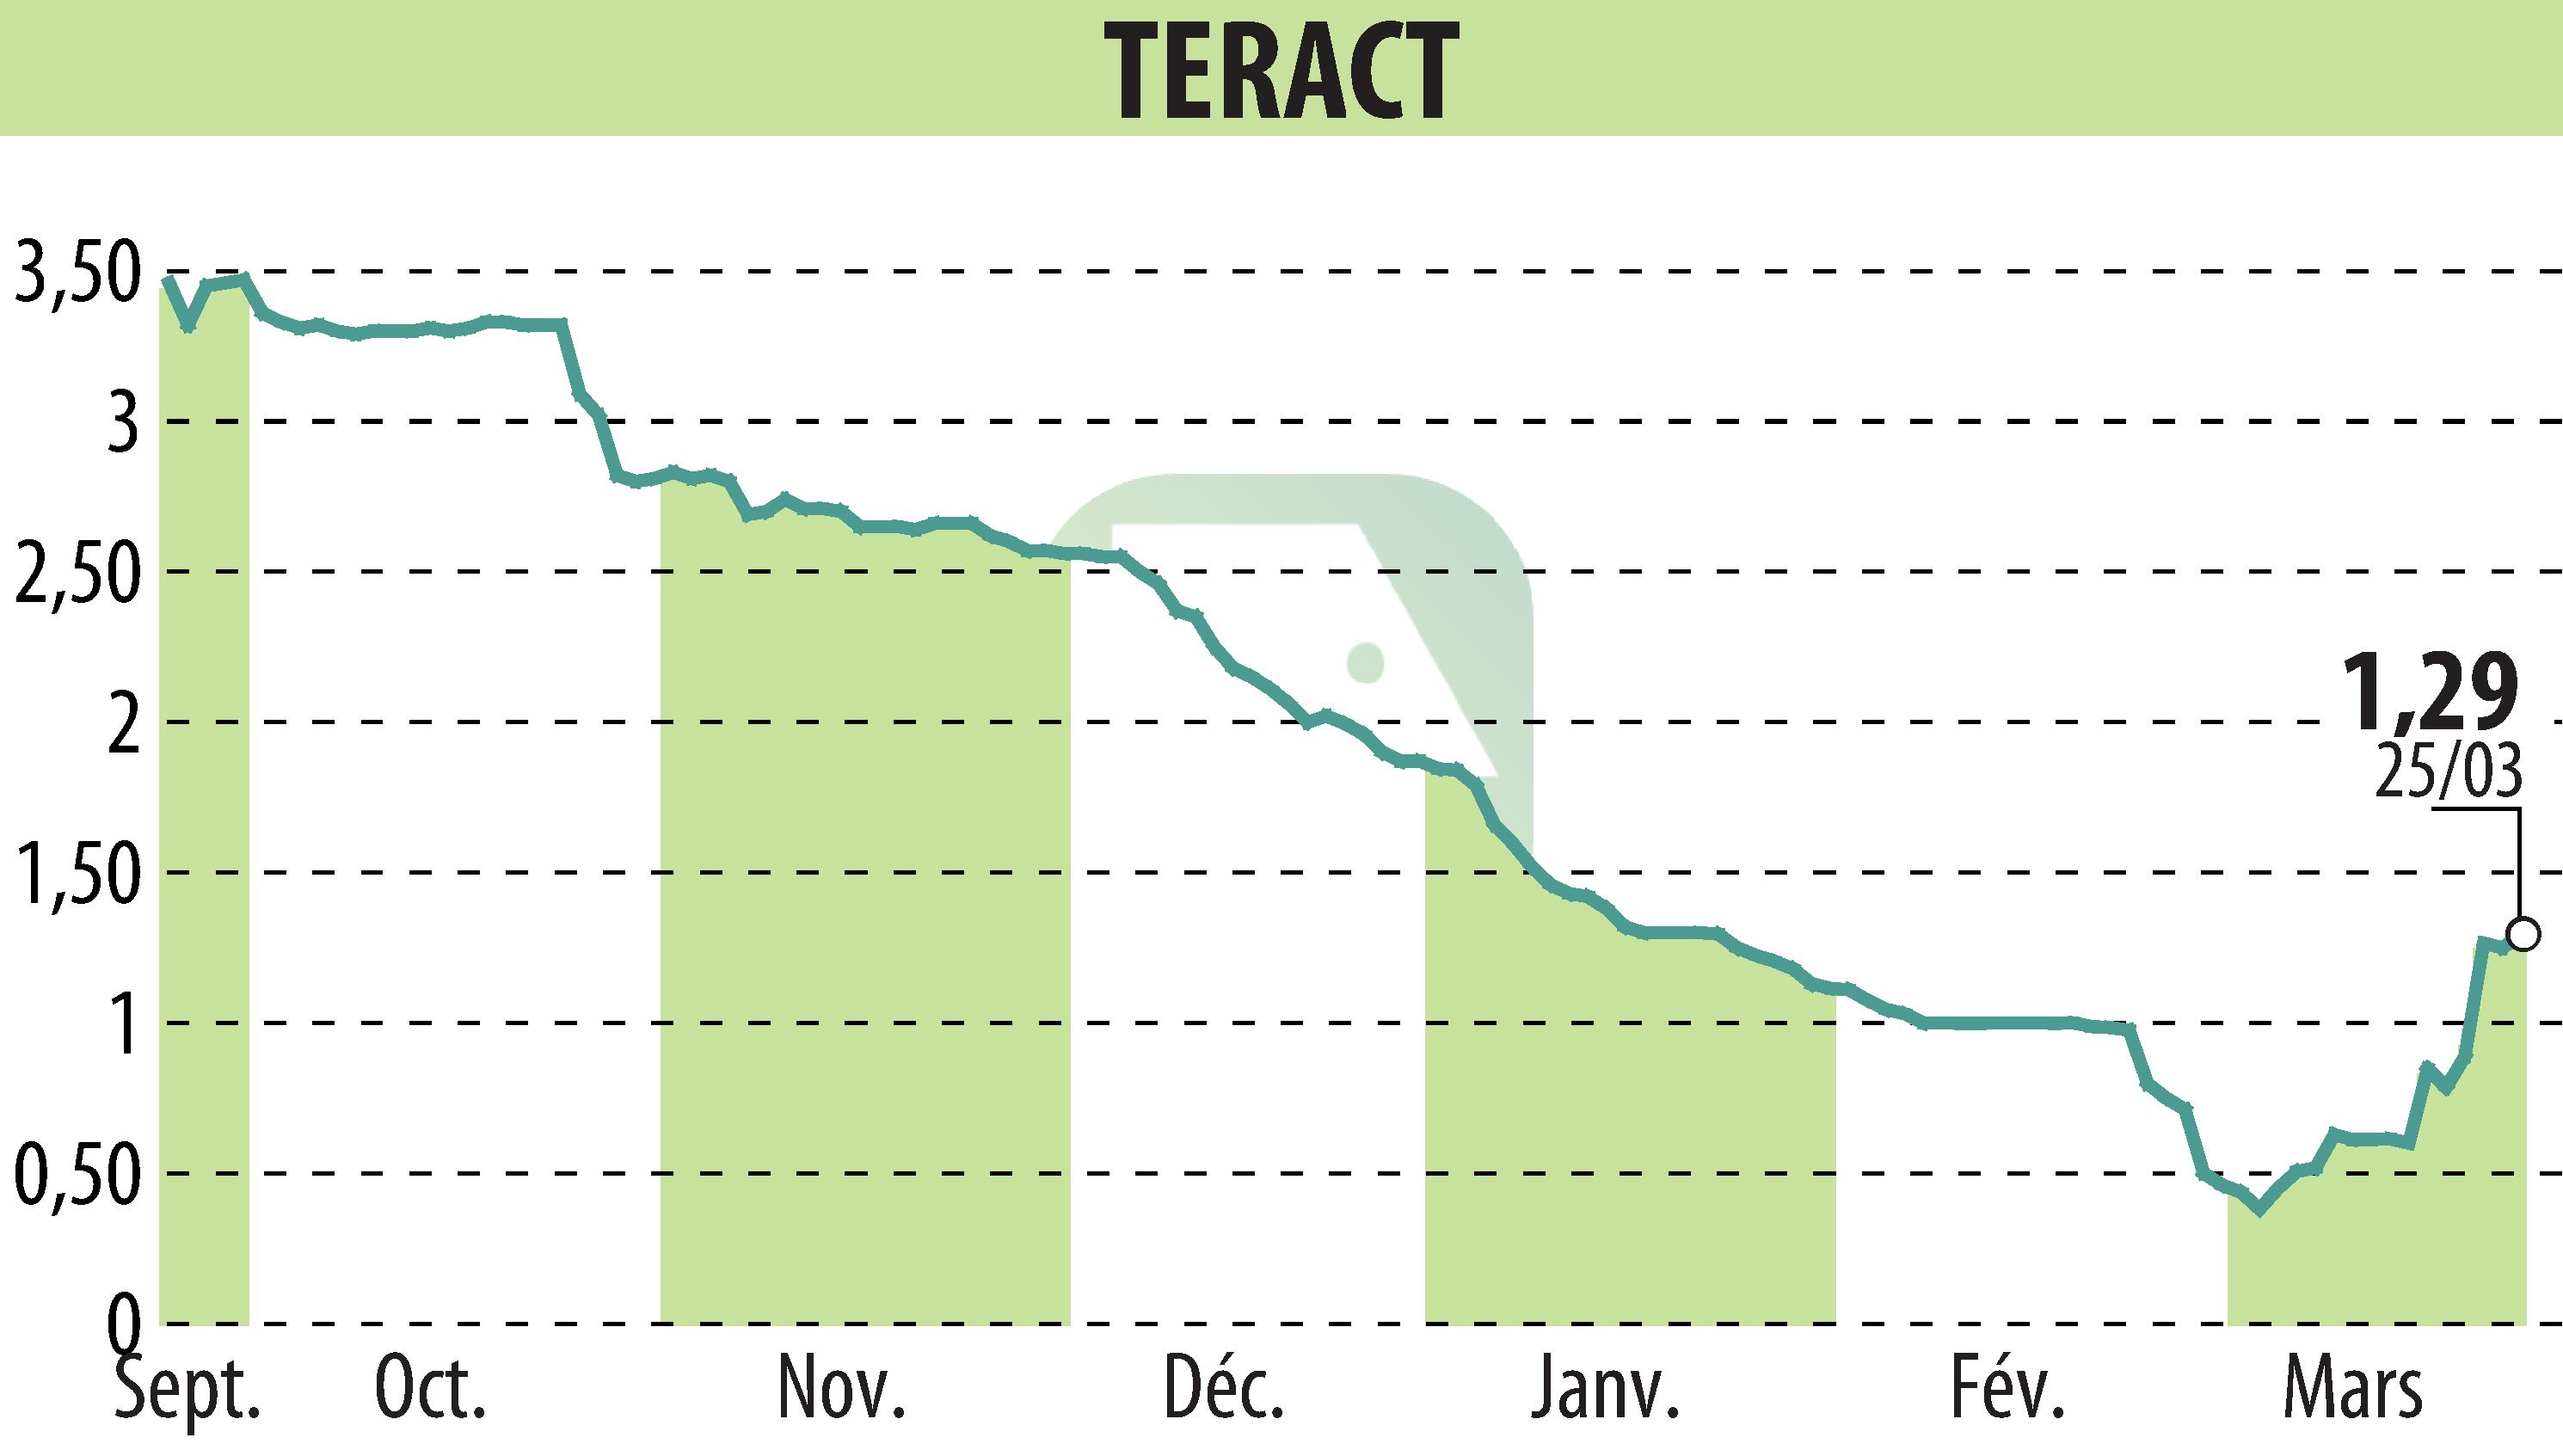 Stock price chart of TERACT (EPA:TRACT) showing fluctuations.